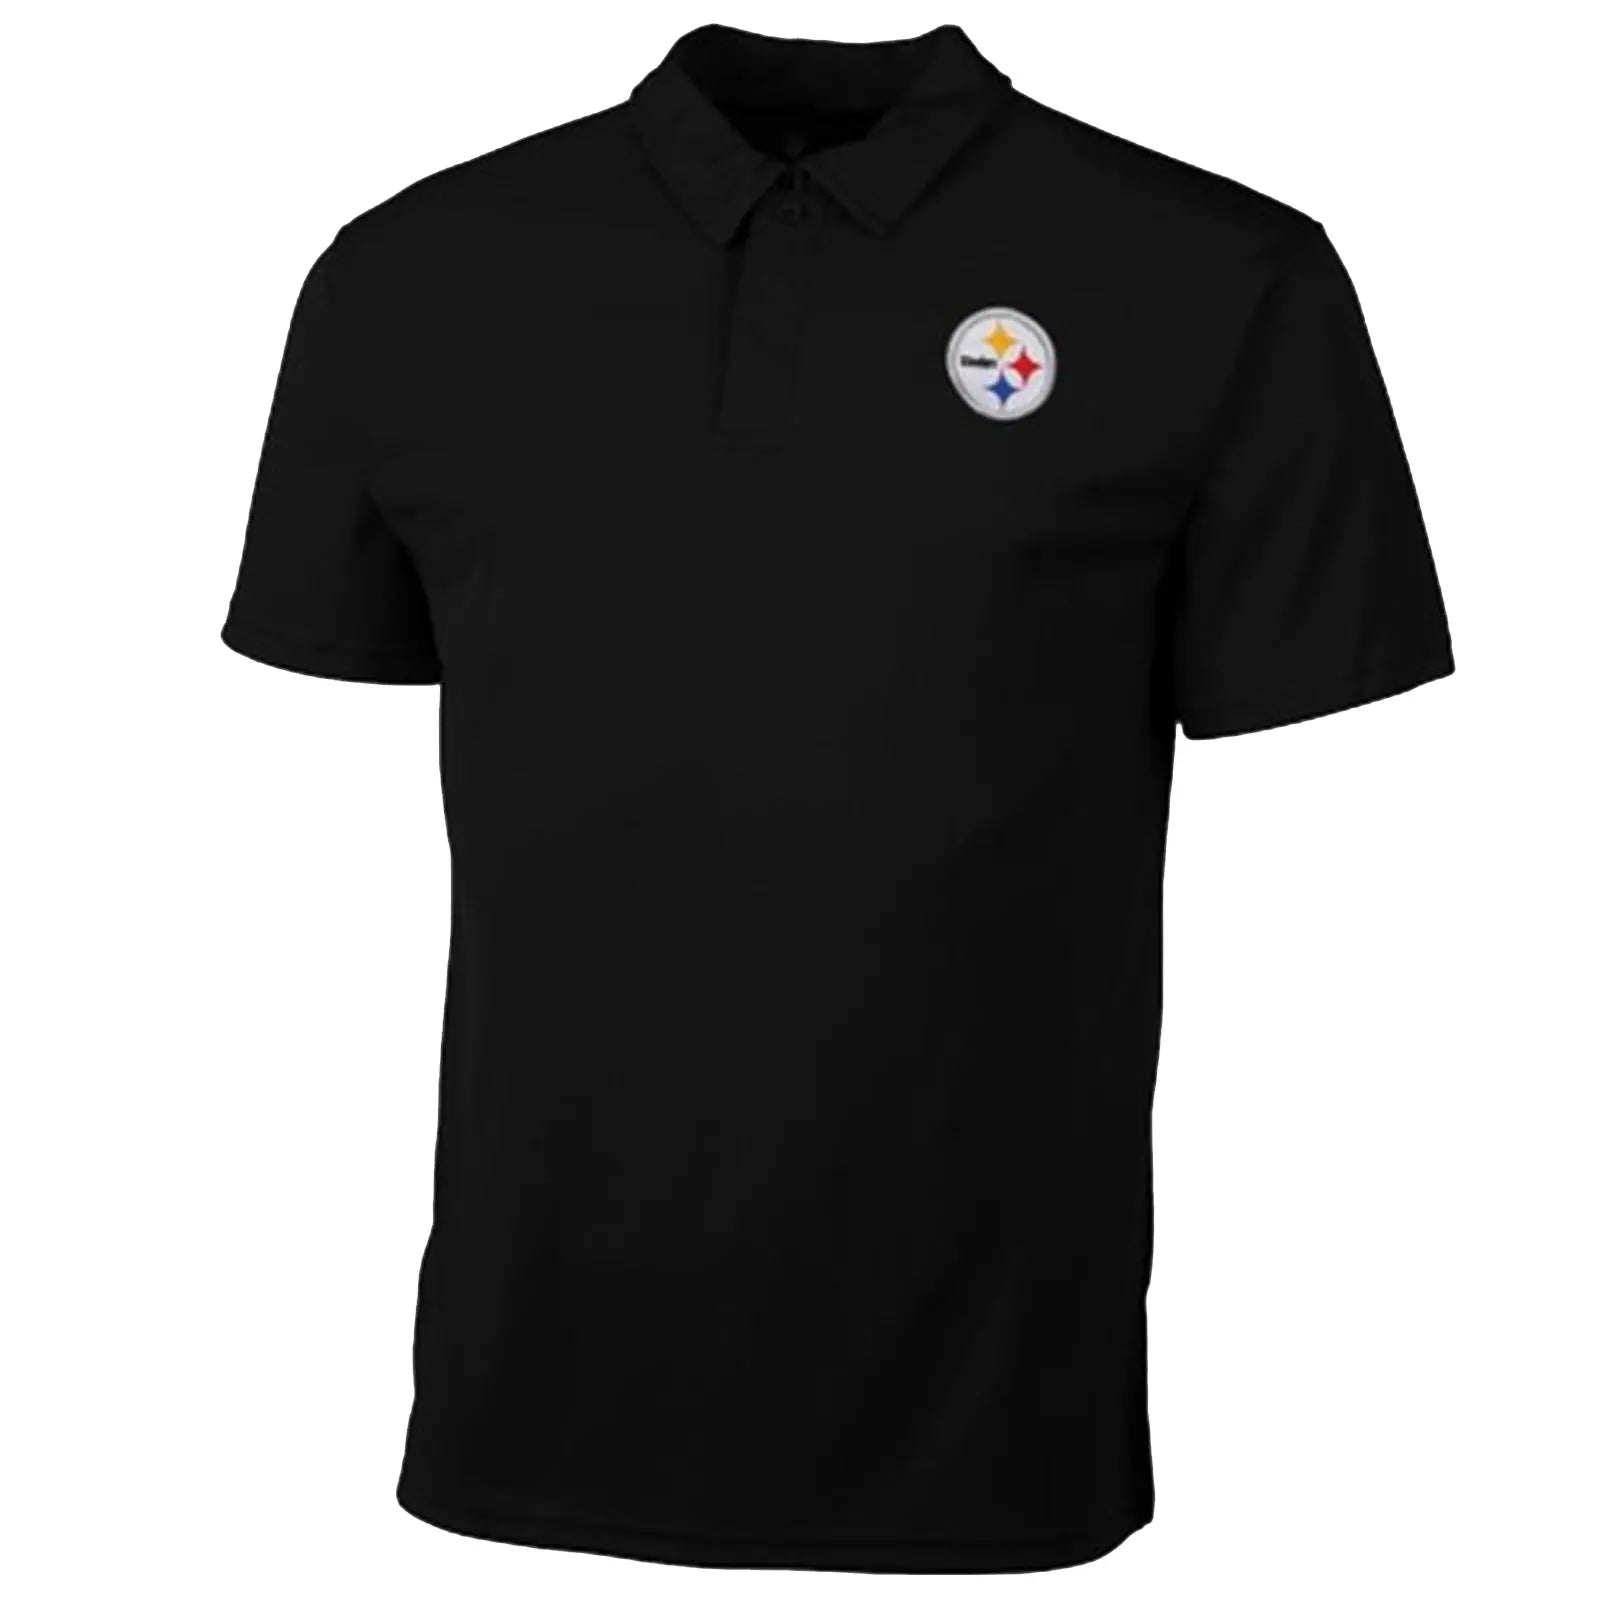 Pittsburgh Steelers Short Sleeve Polo Shirt by NFL Team Apparel 